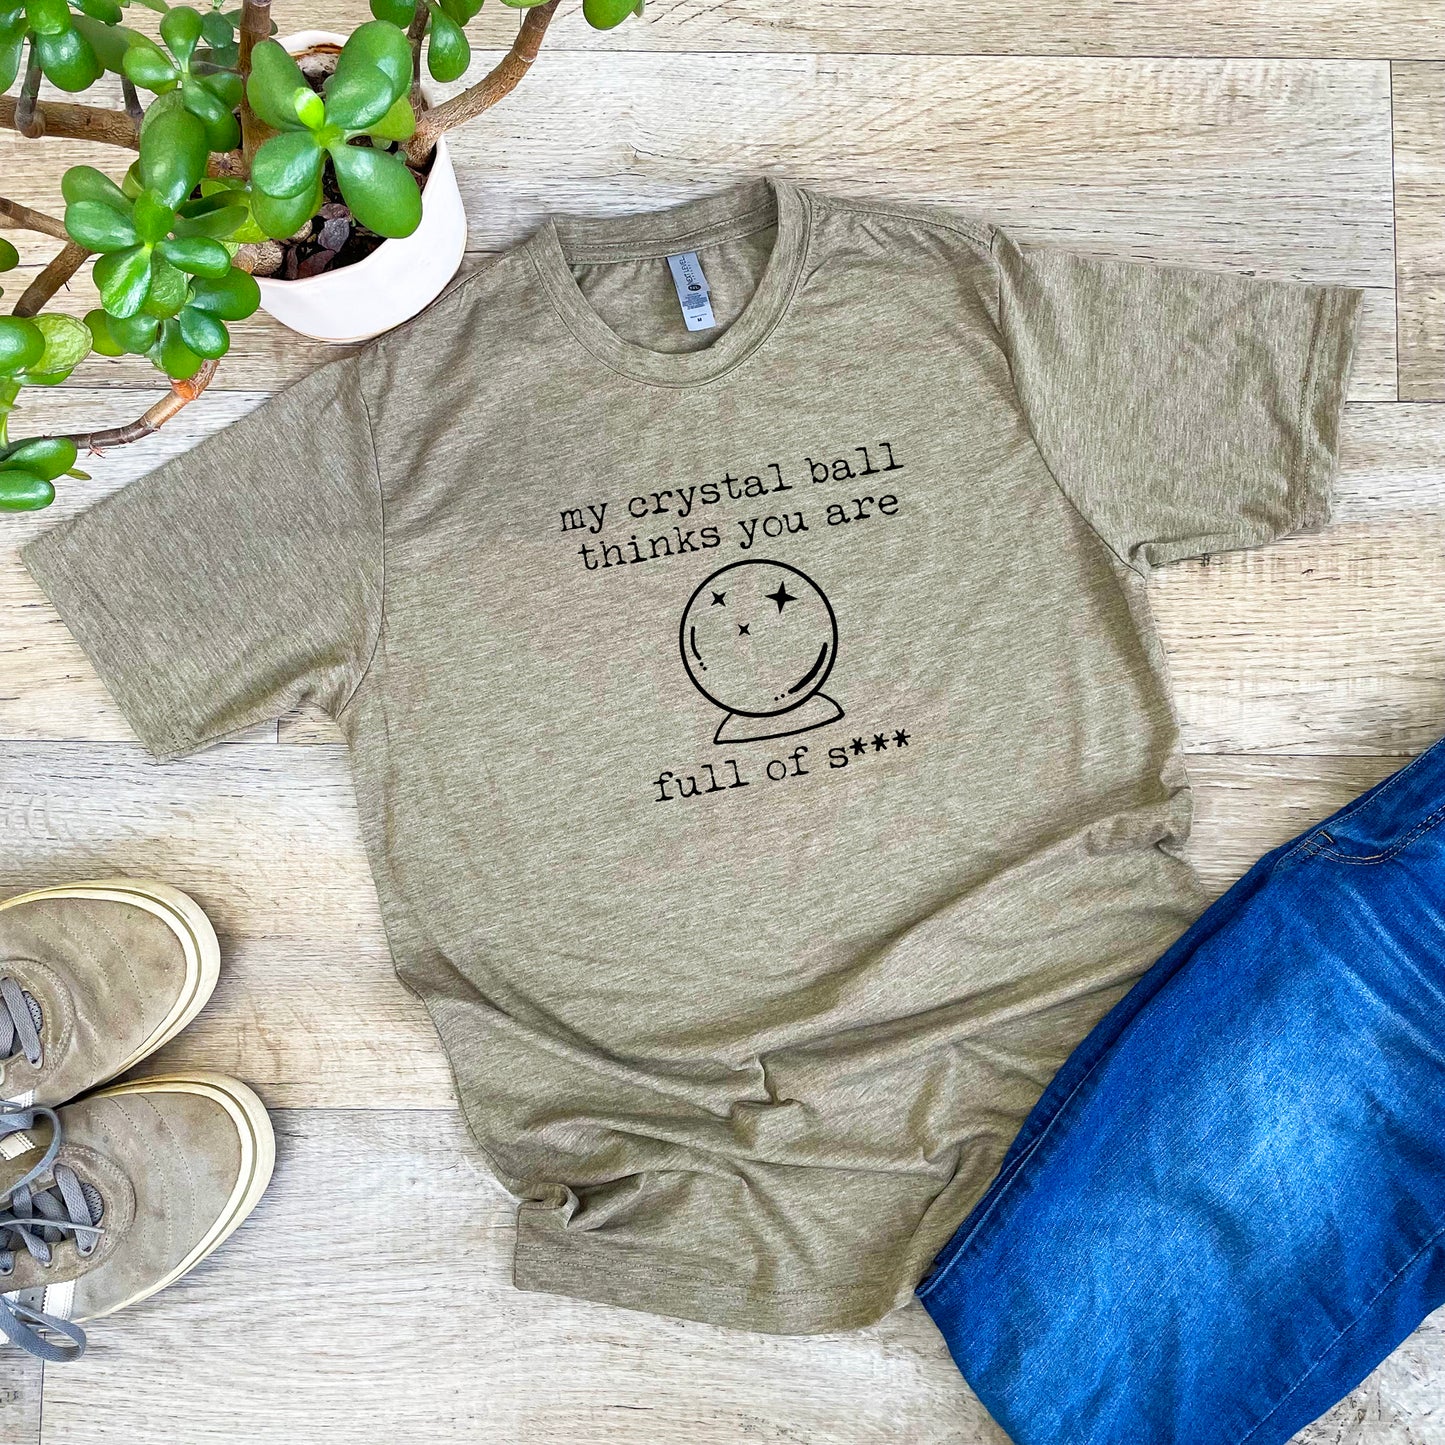 My Crystal Ball Thinks You Are... Full Of S*** - Men's / Unisex Tee - Stonewash Blue or Sage